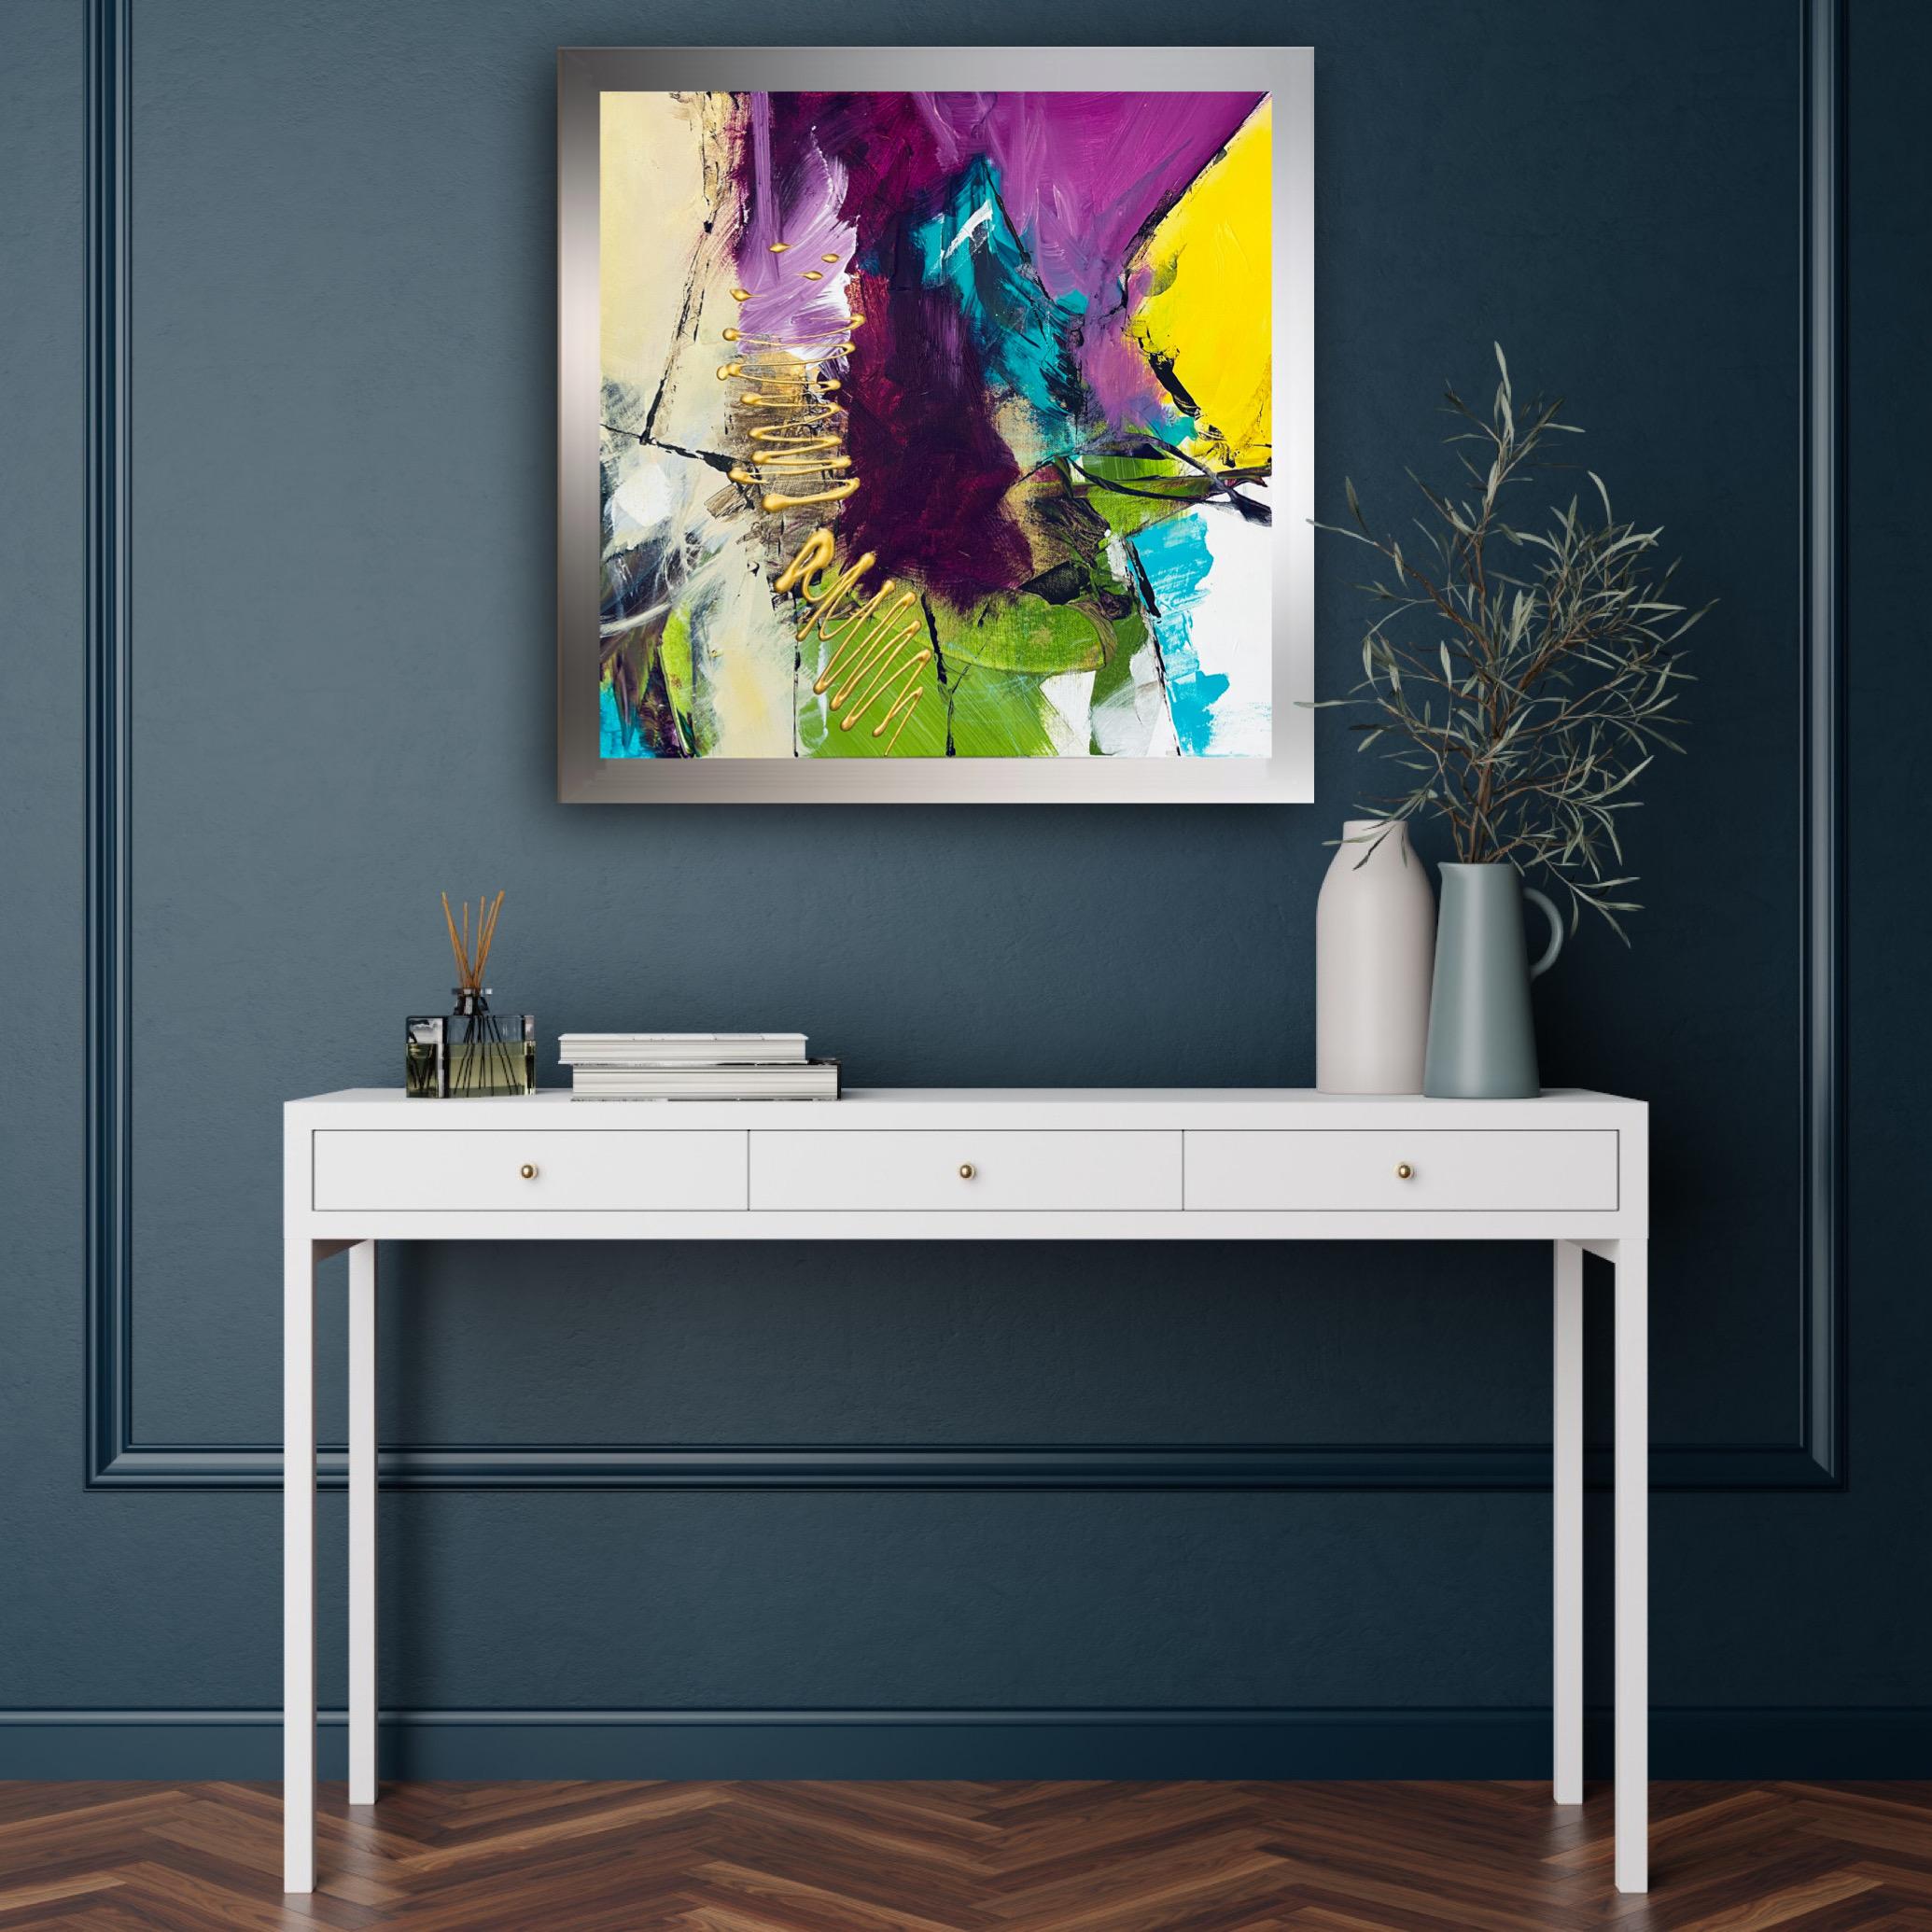 Artist Motivation:

Embrace the depth and allure of this piece in your living space!

This richly colored fun piece, will add a pop of color and energy to your favorite cozy nook or bring vibrancy and allure to any room, infusing it with a sense of